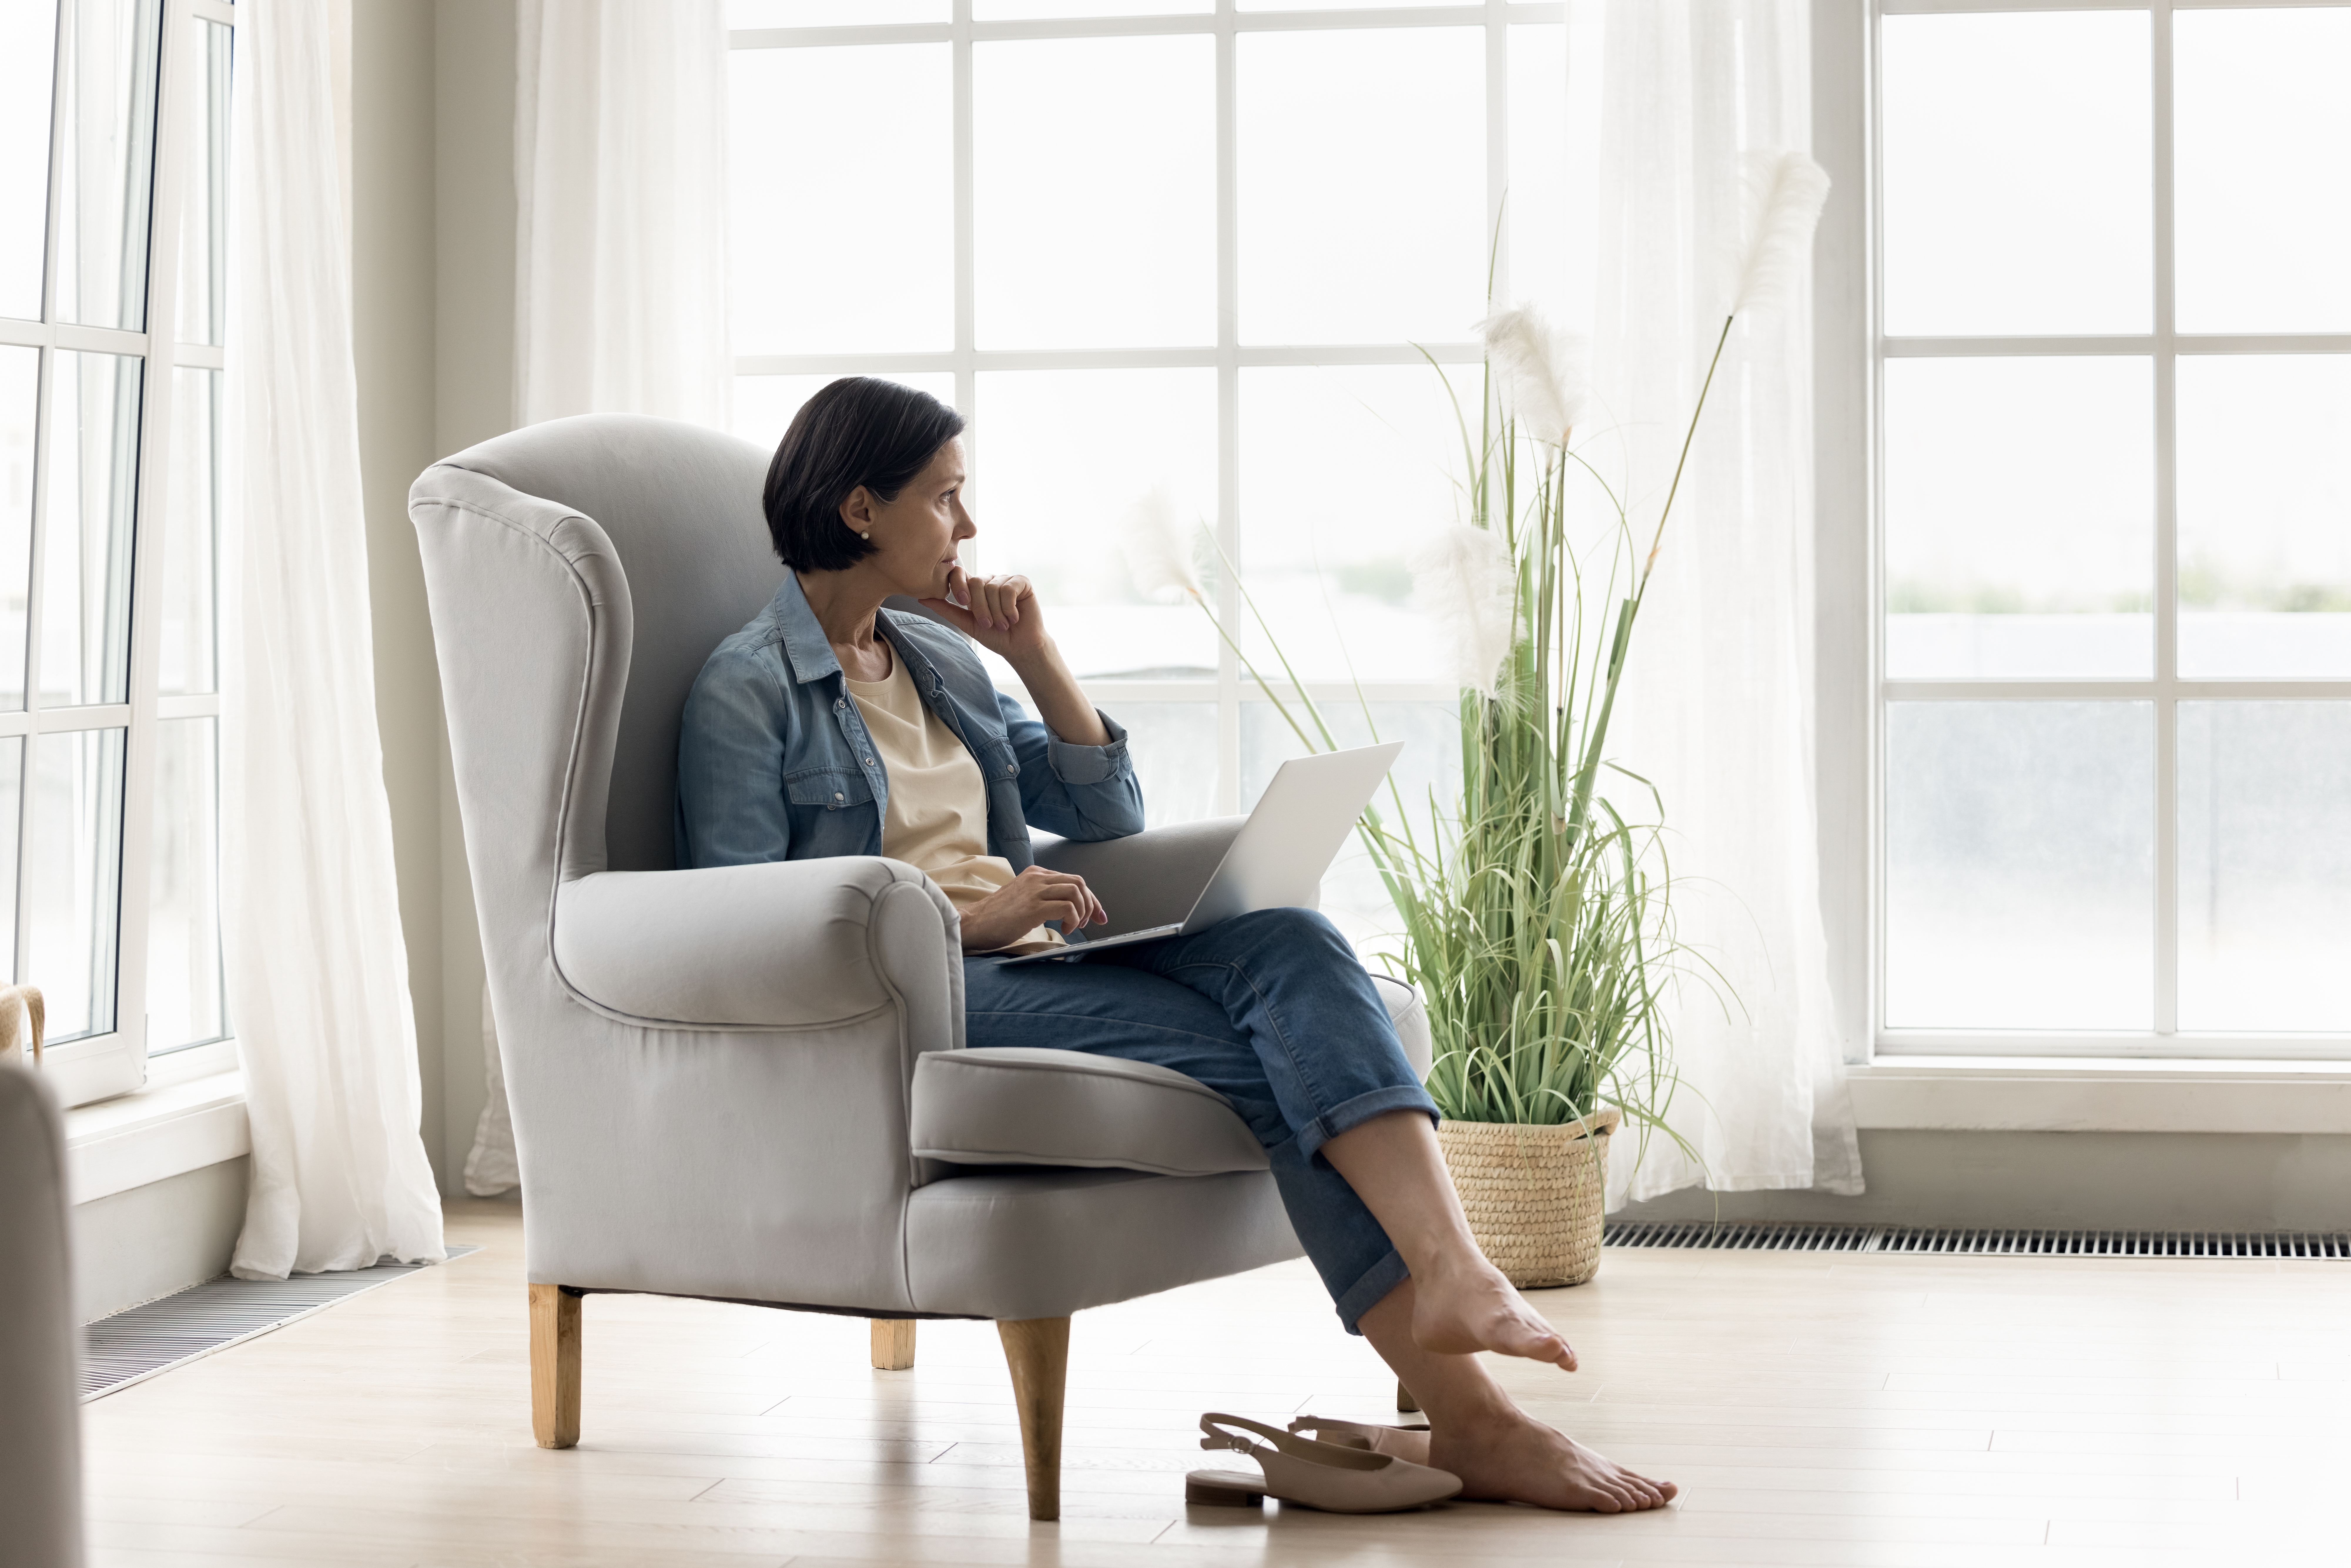 Woman looking out the window as she sits on a chair with her laptop | Source: Shutterstock